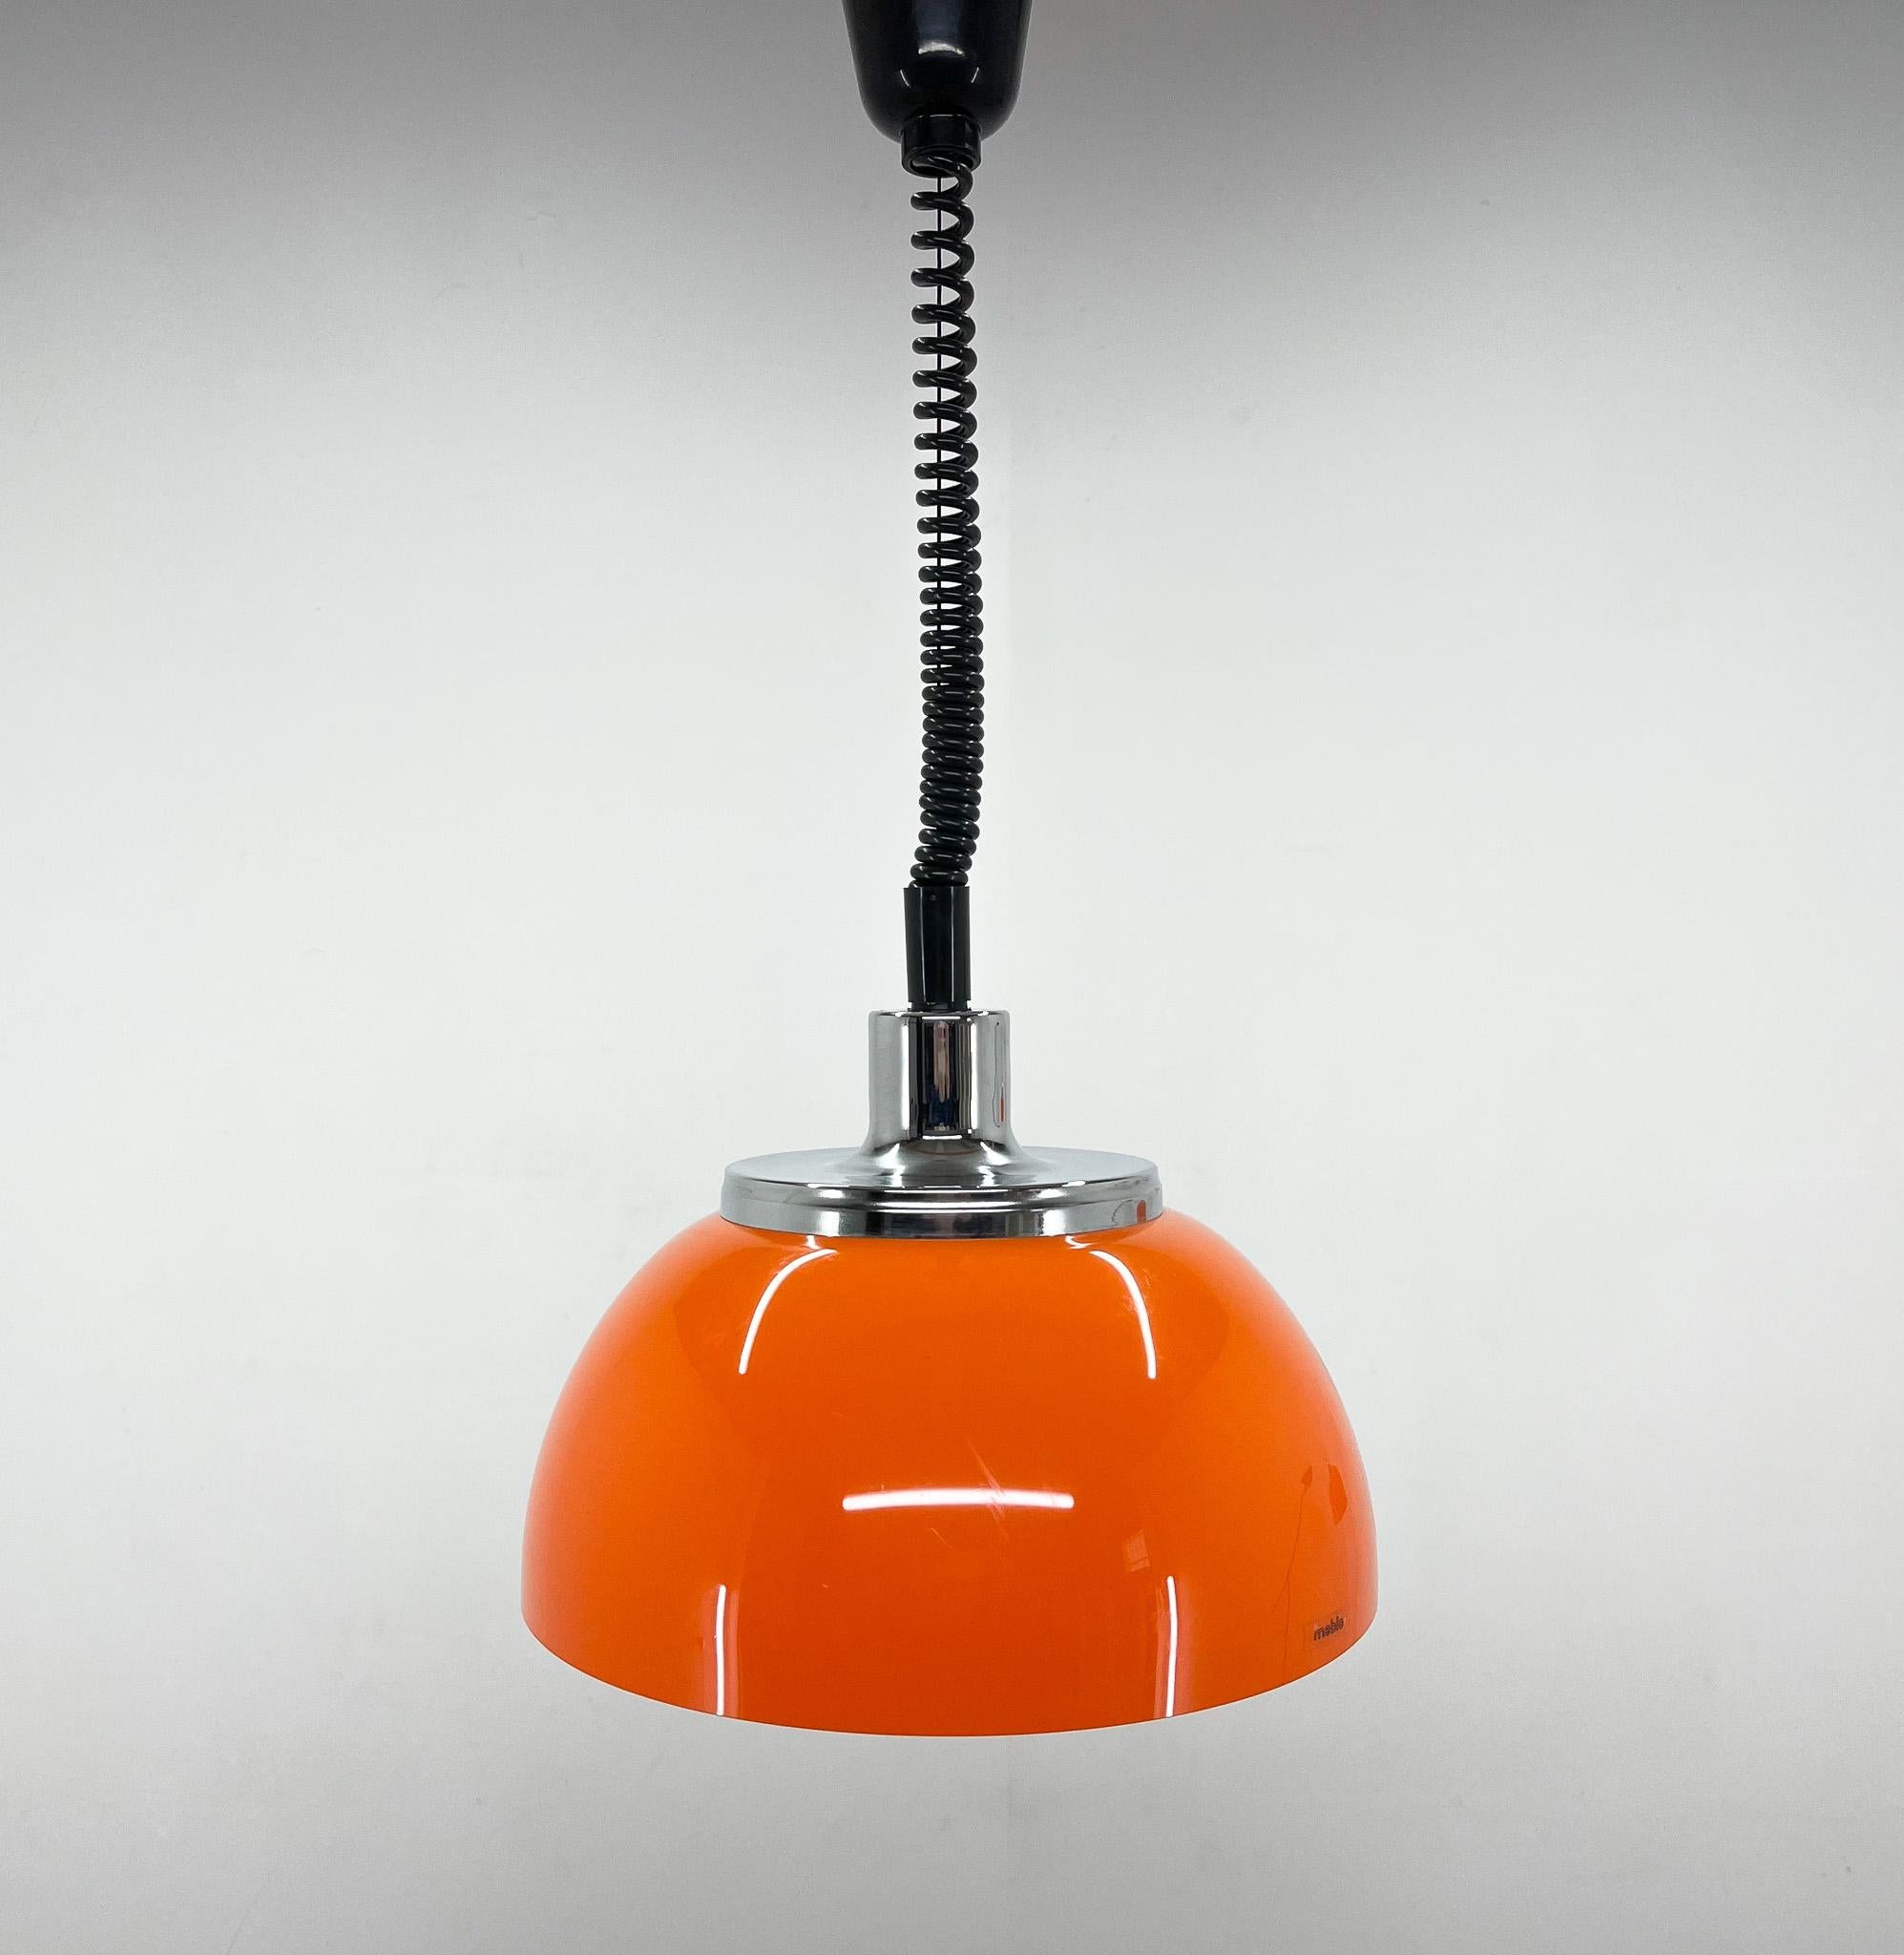 Vintage adjustable, space age pendant, designed by Harvey Guzzini for Meblo in the 1970's. Very good vintage condition. The max hight when fully stretched is 108 cm.